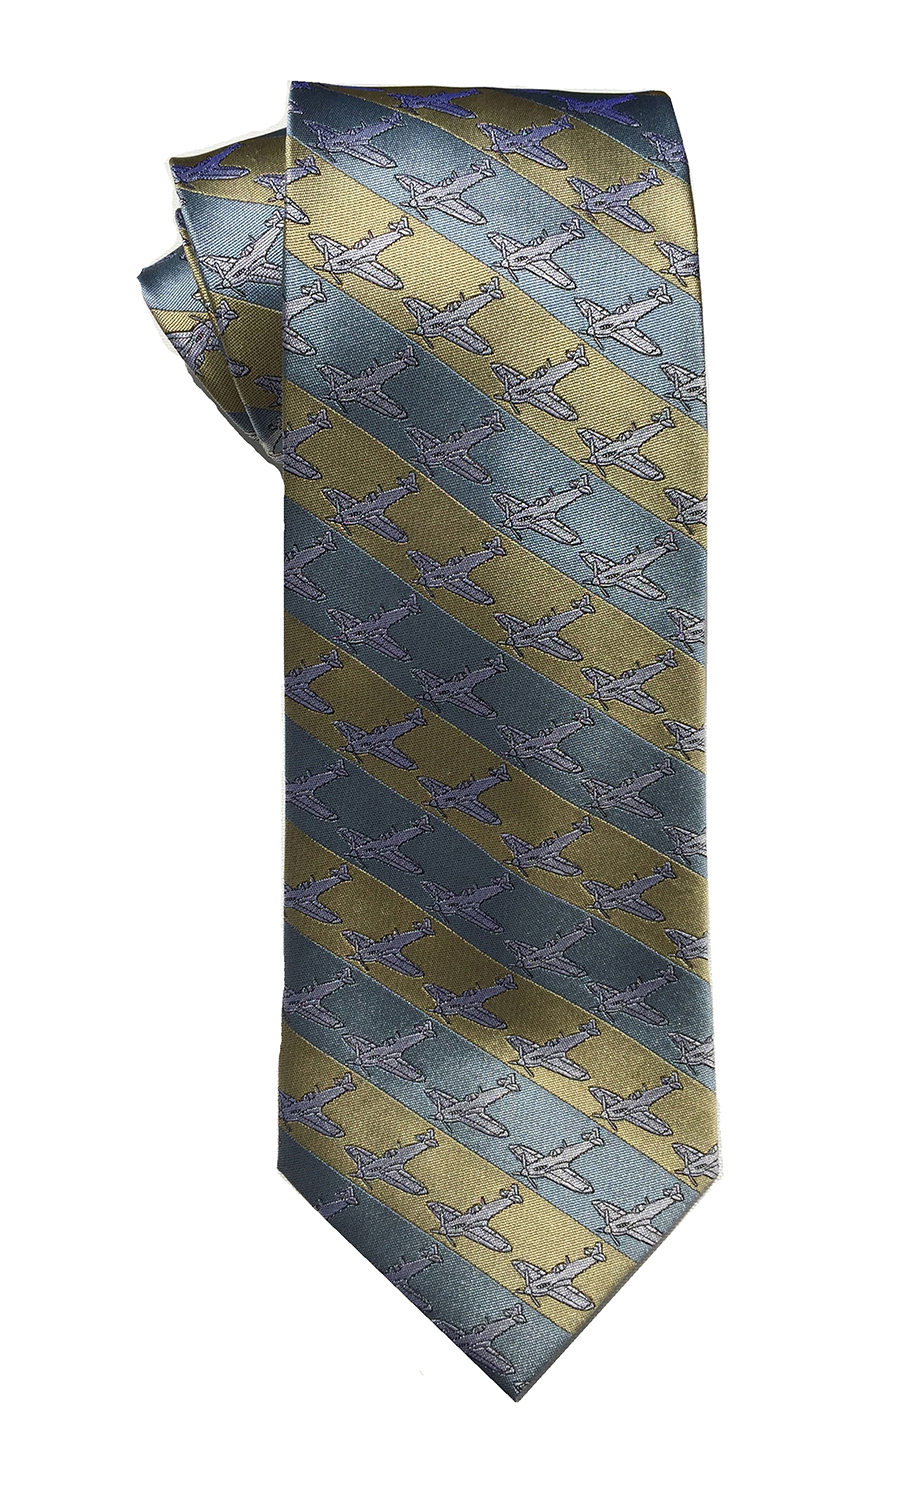 Spitfire airplane tie in sky blue and sun